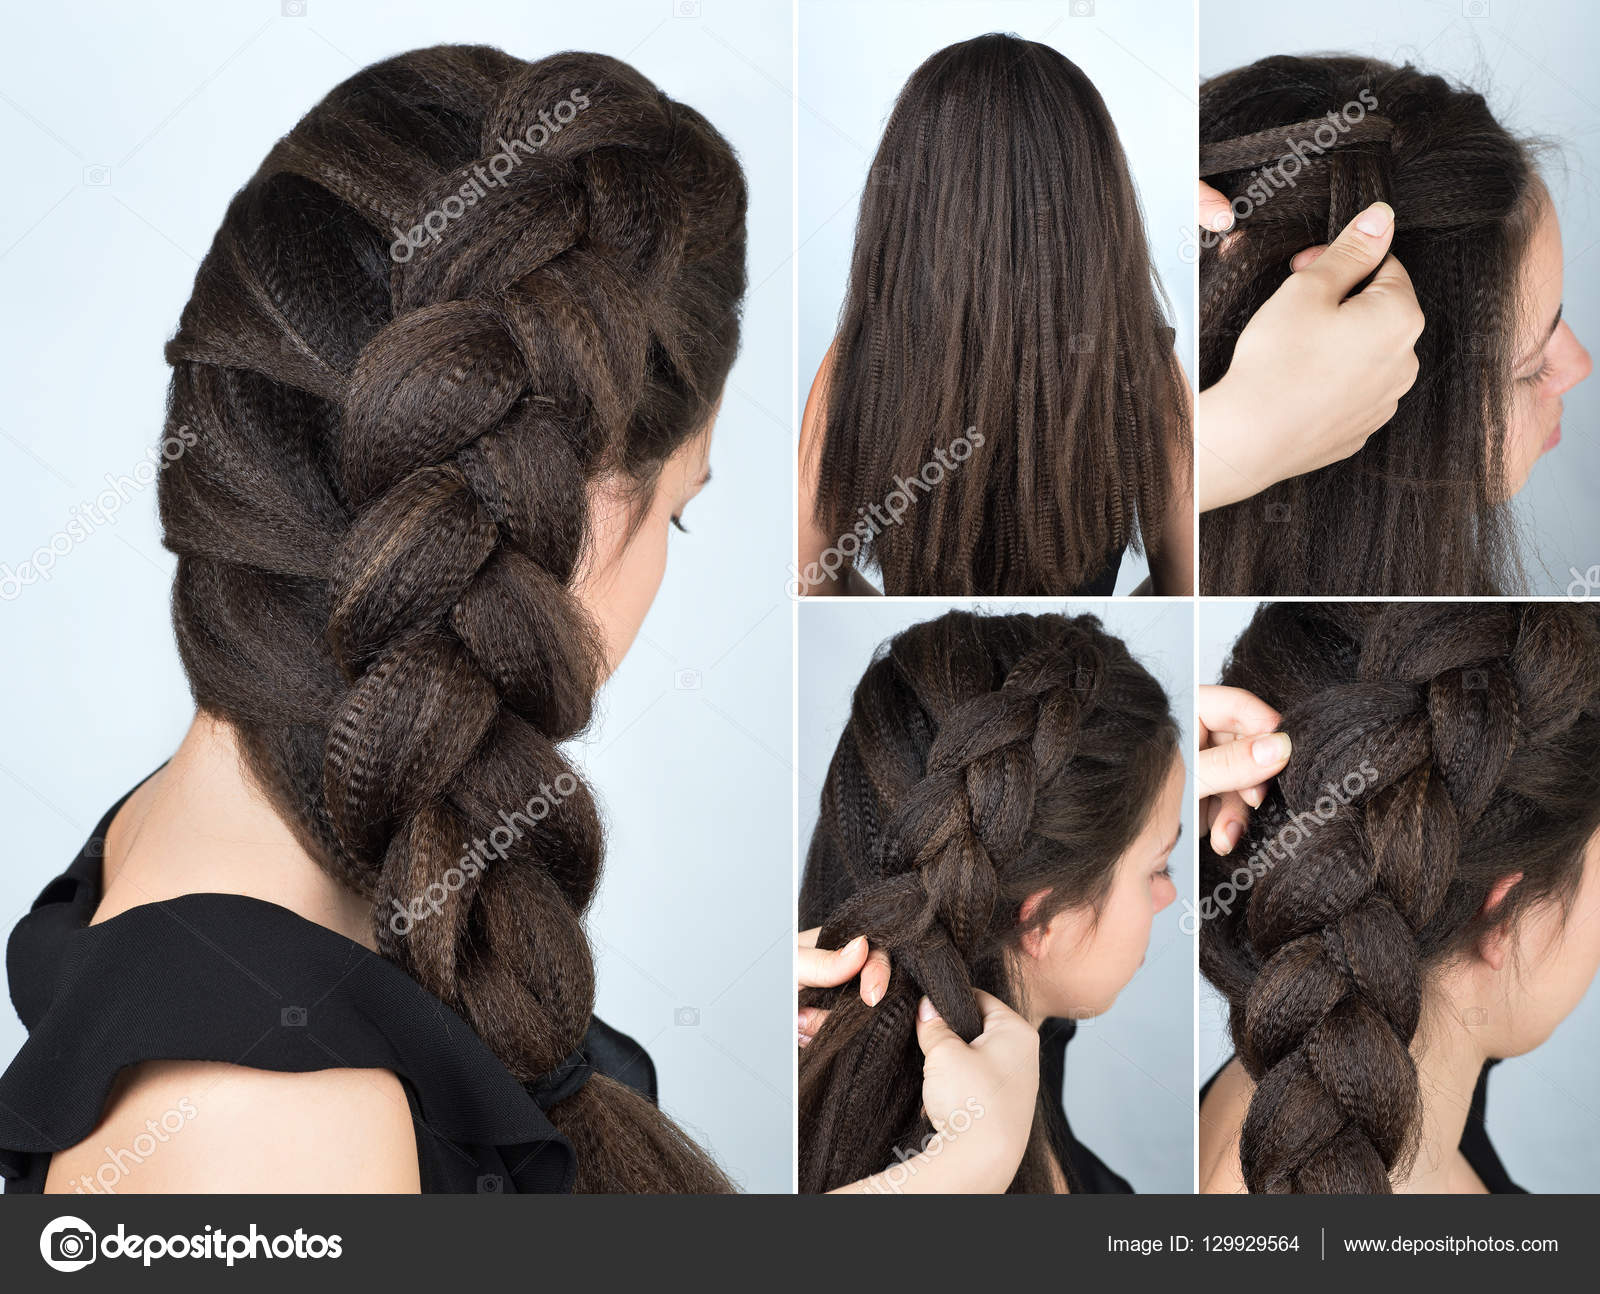 Easy Hairstyles to Copy When You're Running Late | Hair beauty, Hair  inspiration, Hair today